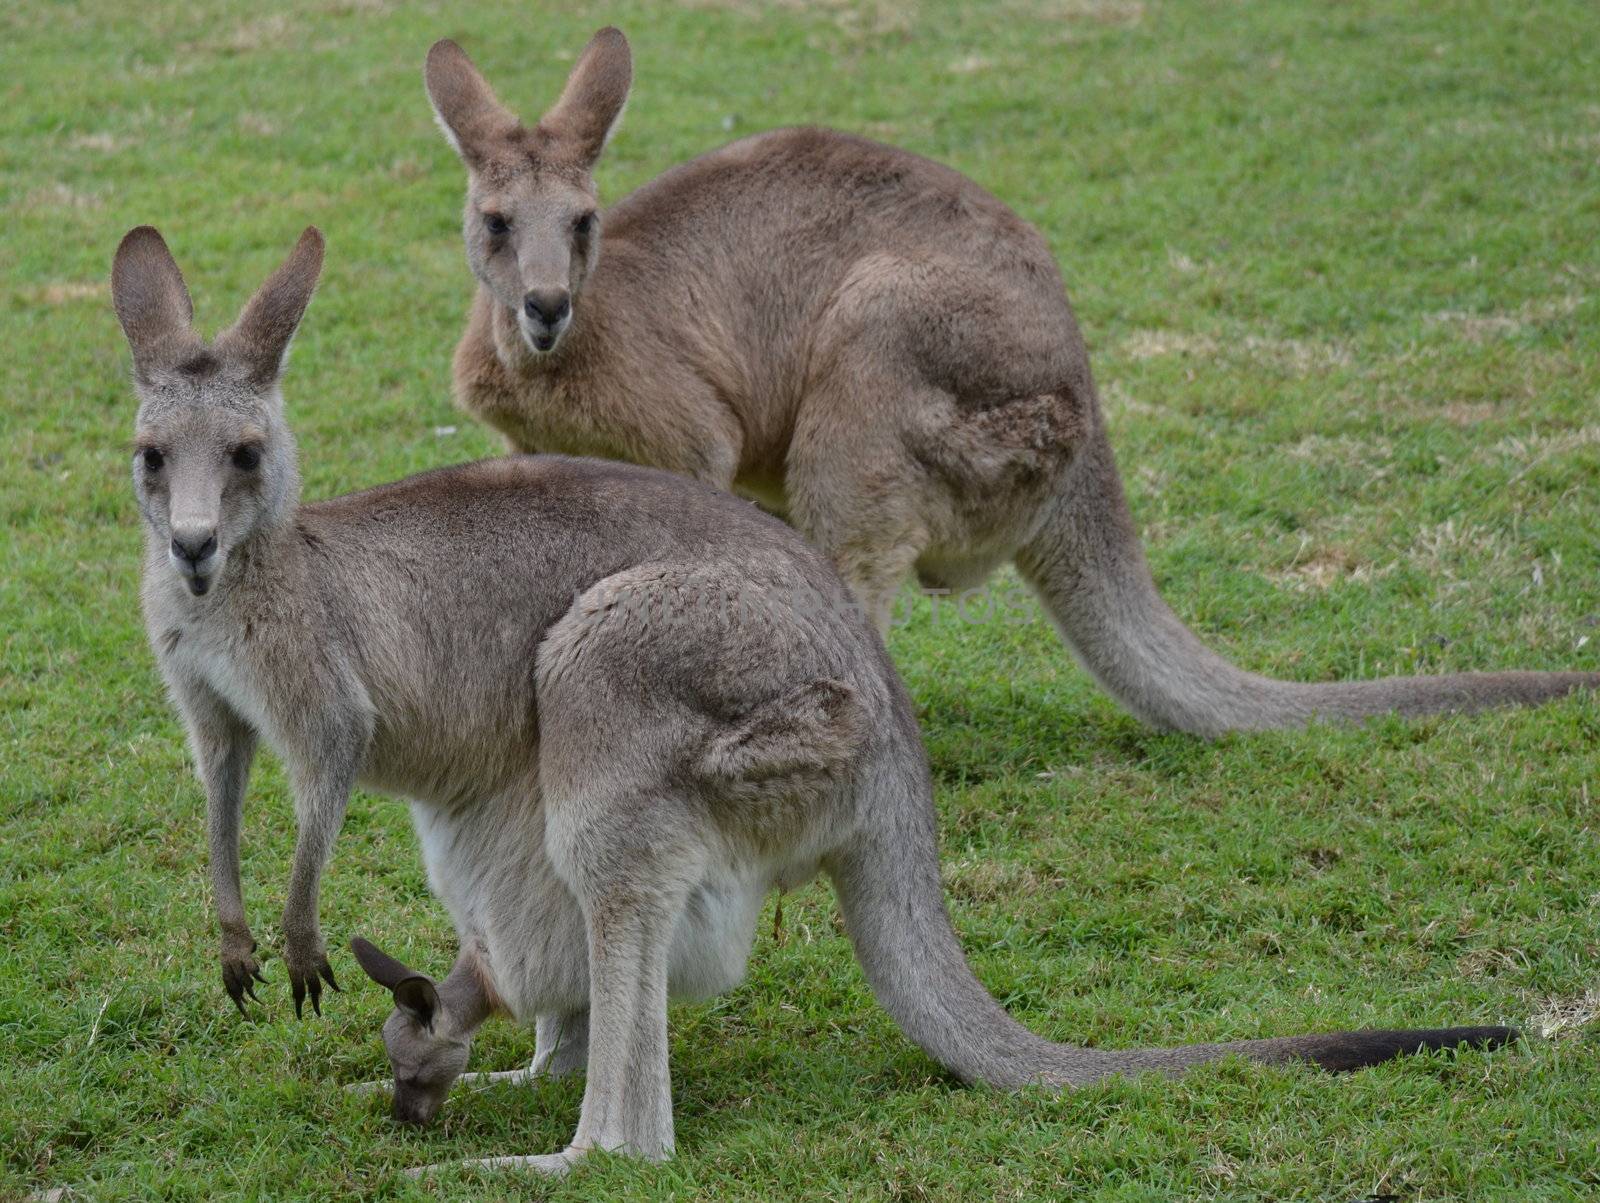 Two Australian Kangaroos with baby joey in pouch by KirbyWalkerPhotos